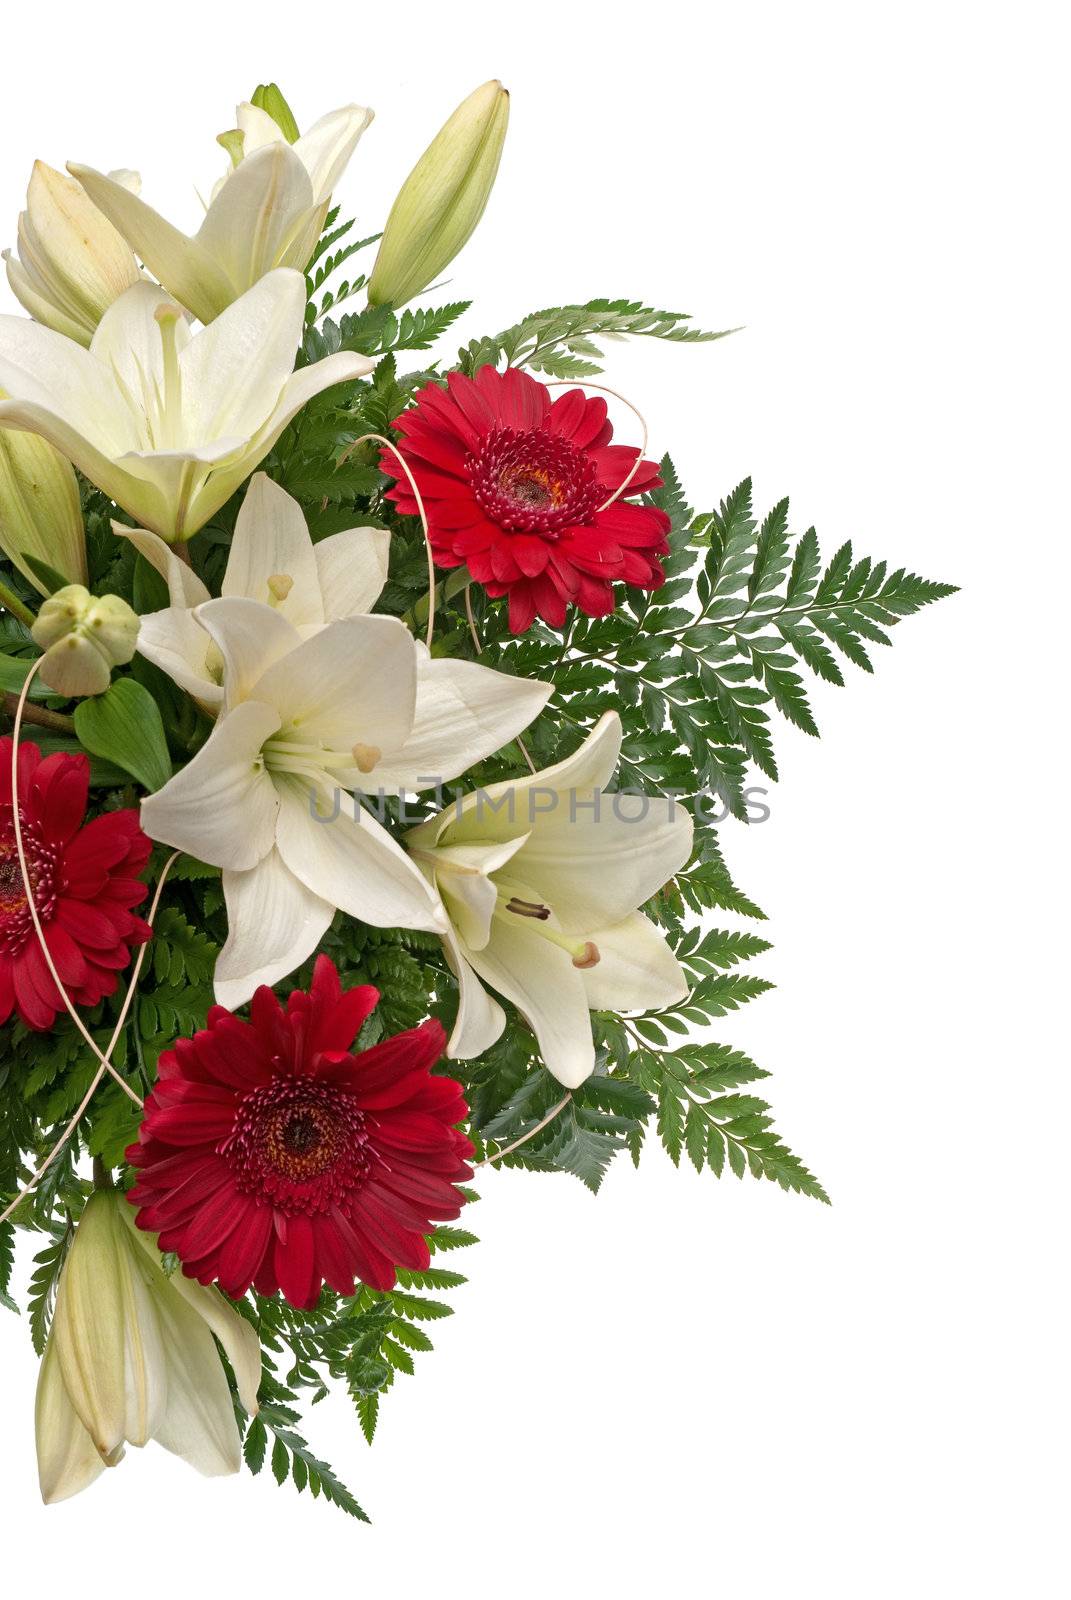 Detail of bouquet of flowers on white background.